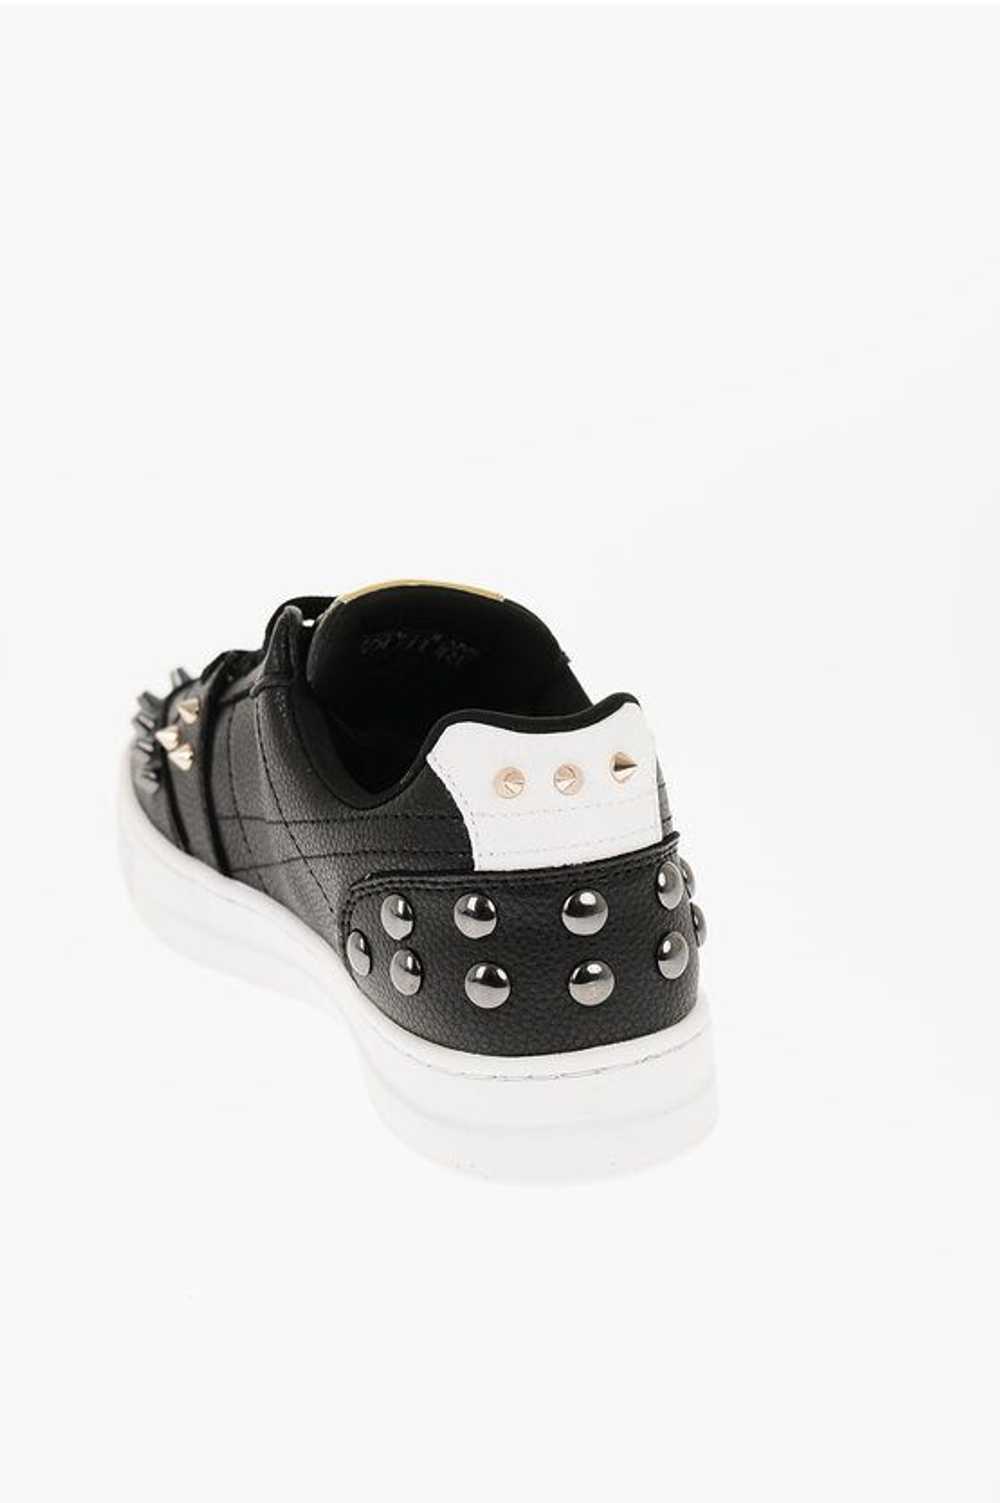 Versace og1mm0524 Leather Court Sneakers in Black - image 3